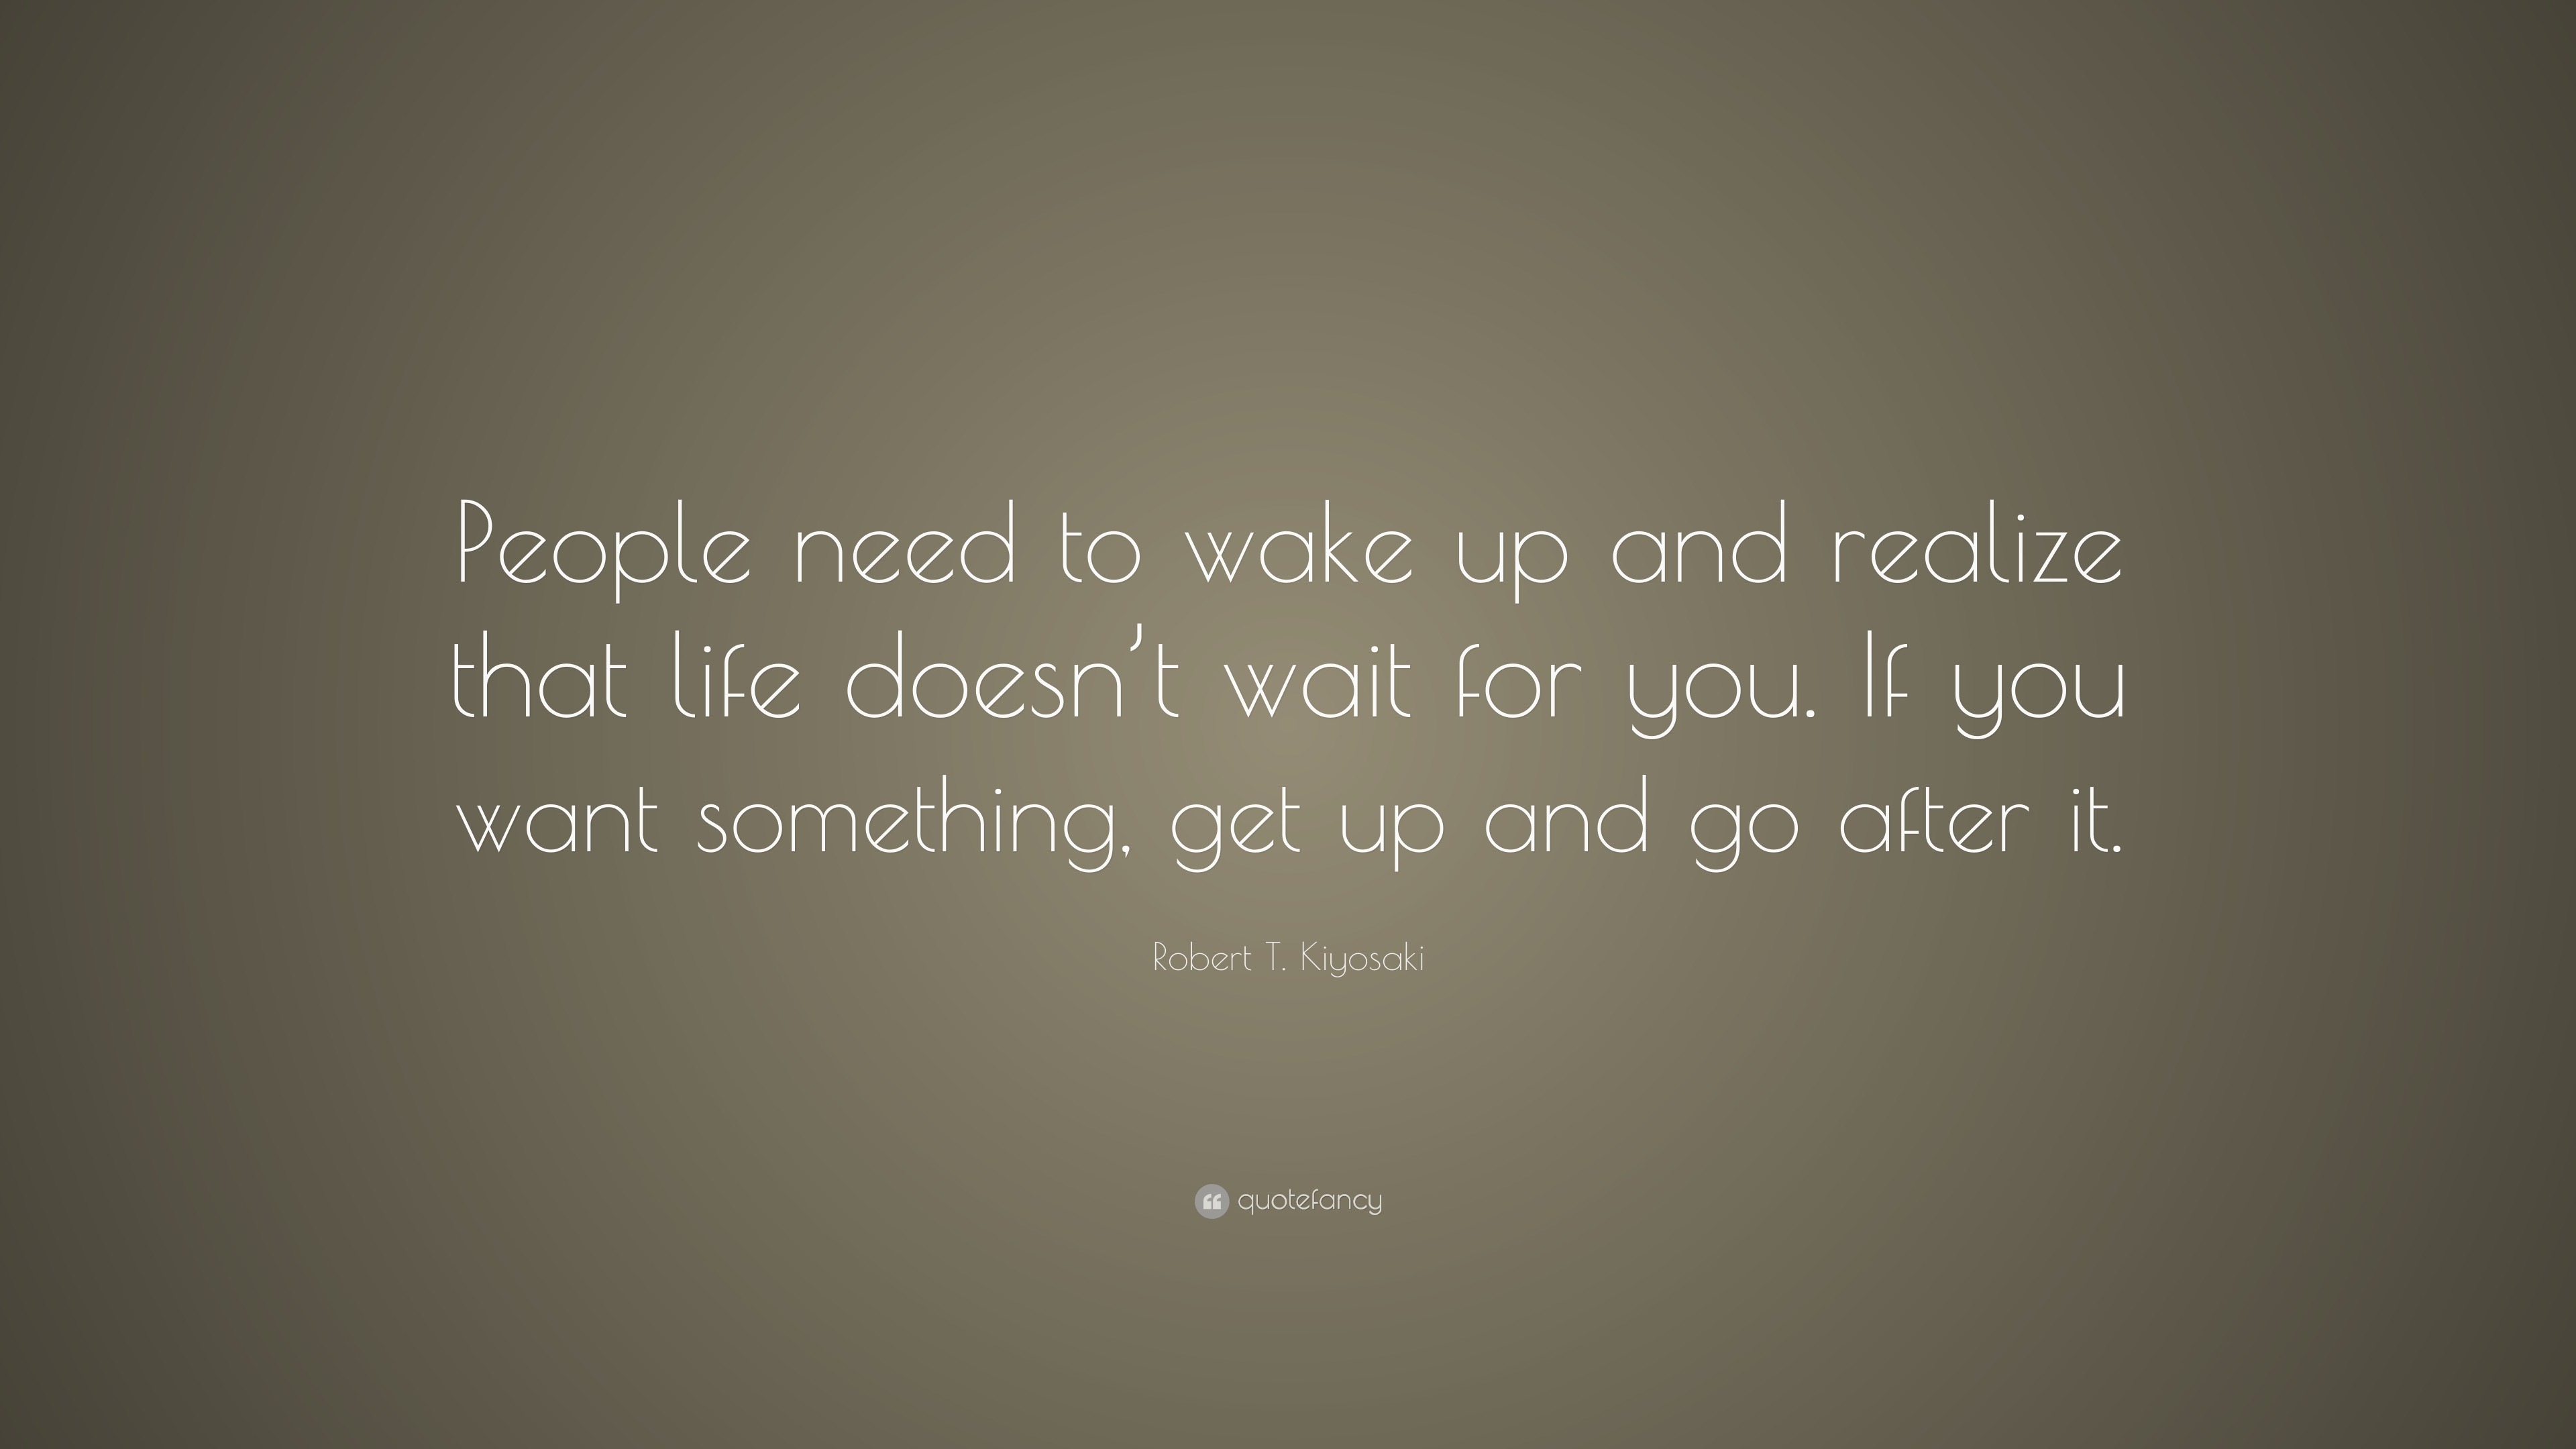 Robert T. Kiyosaki Quote: “People Need To Wake Up And Realize That Life Doesn't Wait